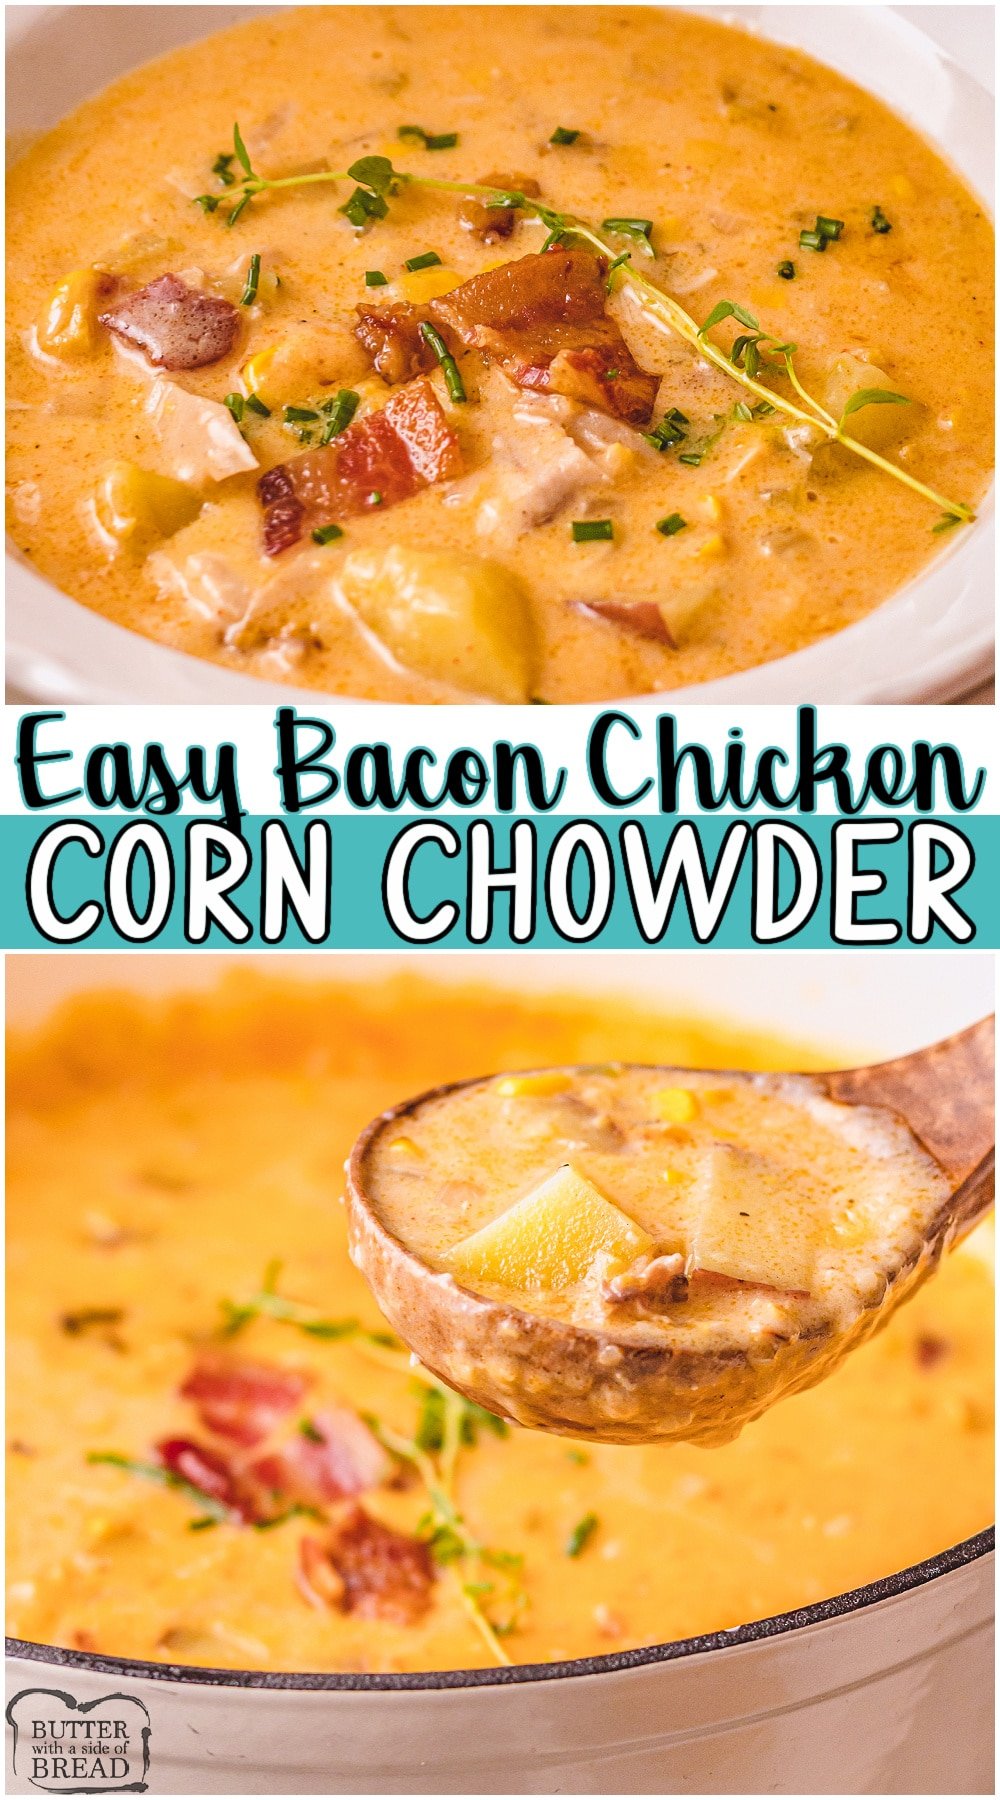 Chicken and corn chowder recipe made with sweet corn, potatoes, chicken, bacon, and cheese. Easy to make creamy chowder perfect for Fall dinners. #chowder #corn #chicken #bacon #cheese #dinner #easyrecipe from BUTTER WITH A SIDE OF BREAD